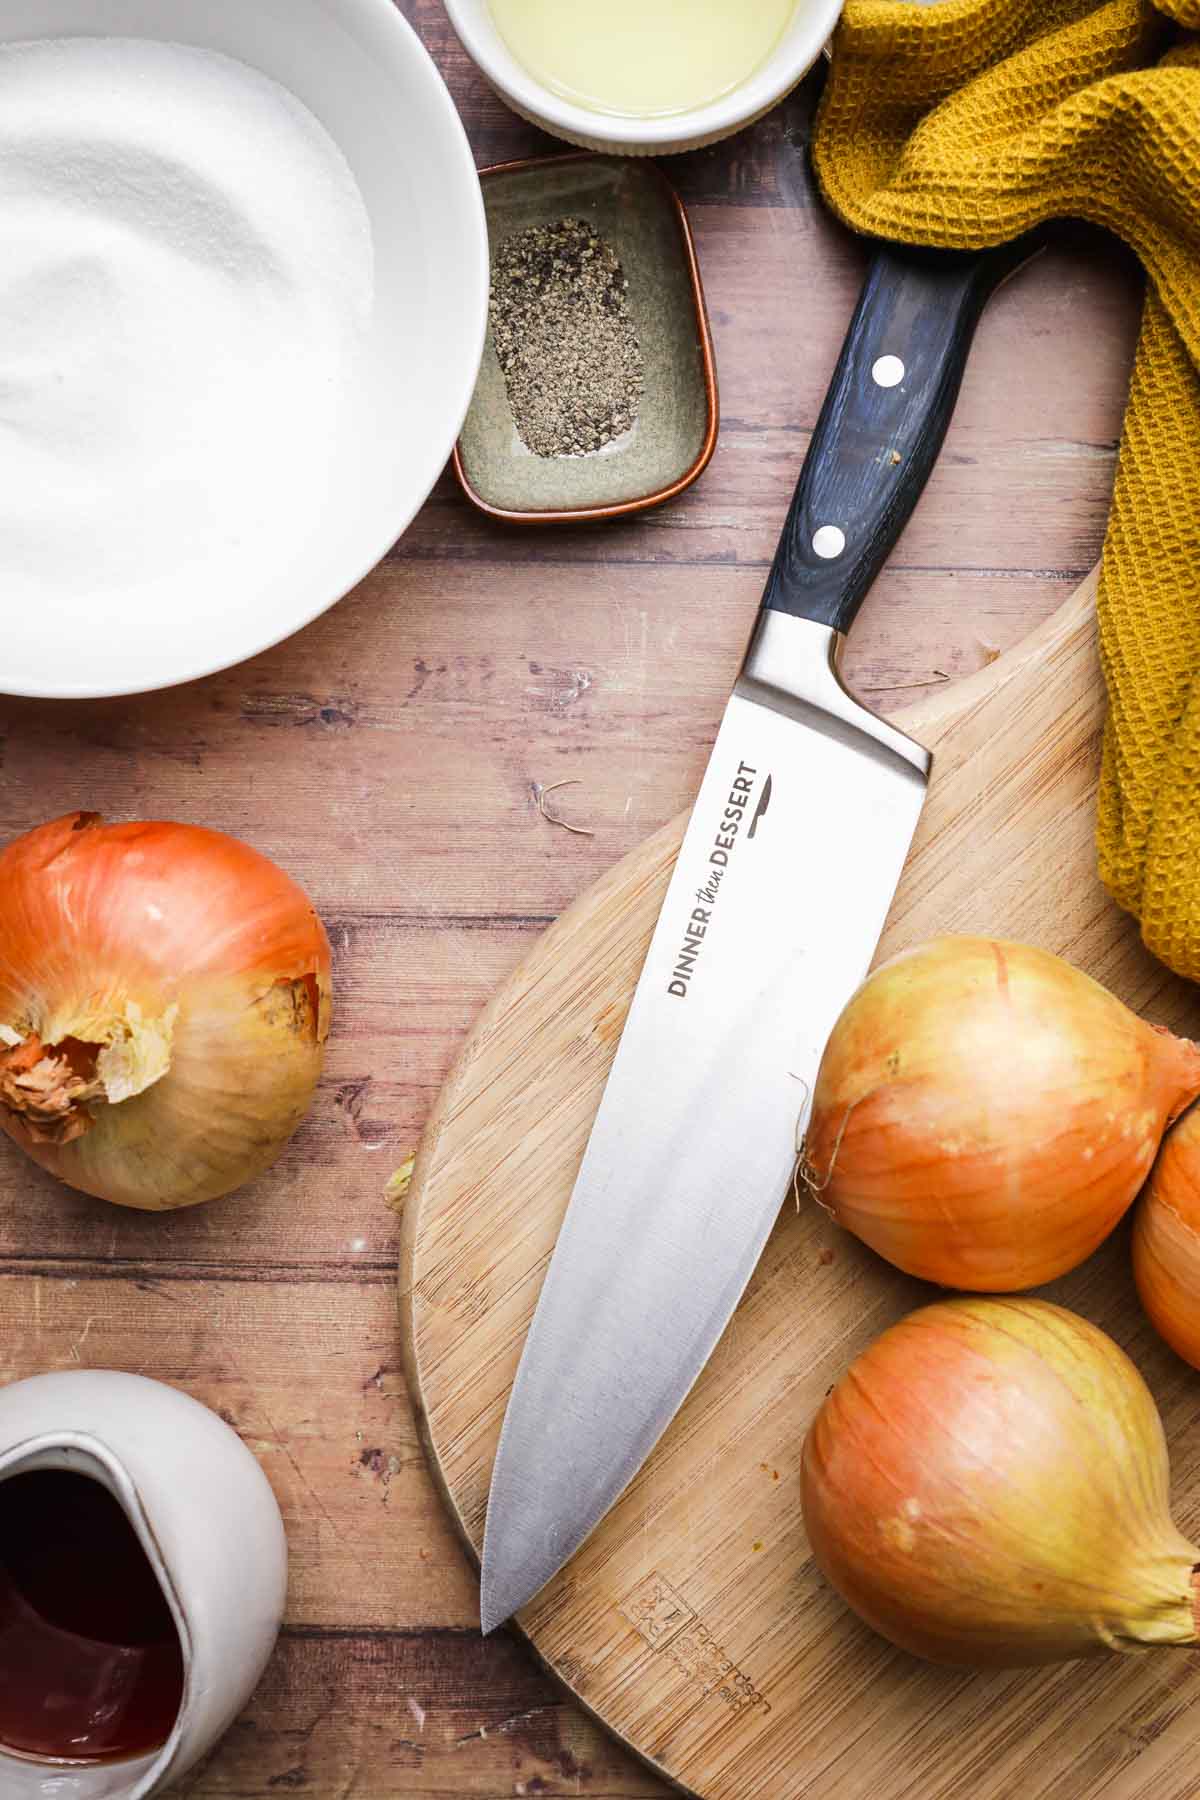 Onion Jam Ingredients spread out and chefs knife in middle next to uncut onions